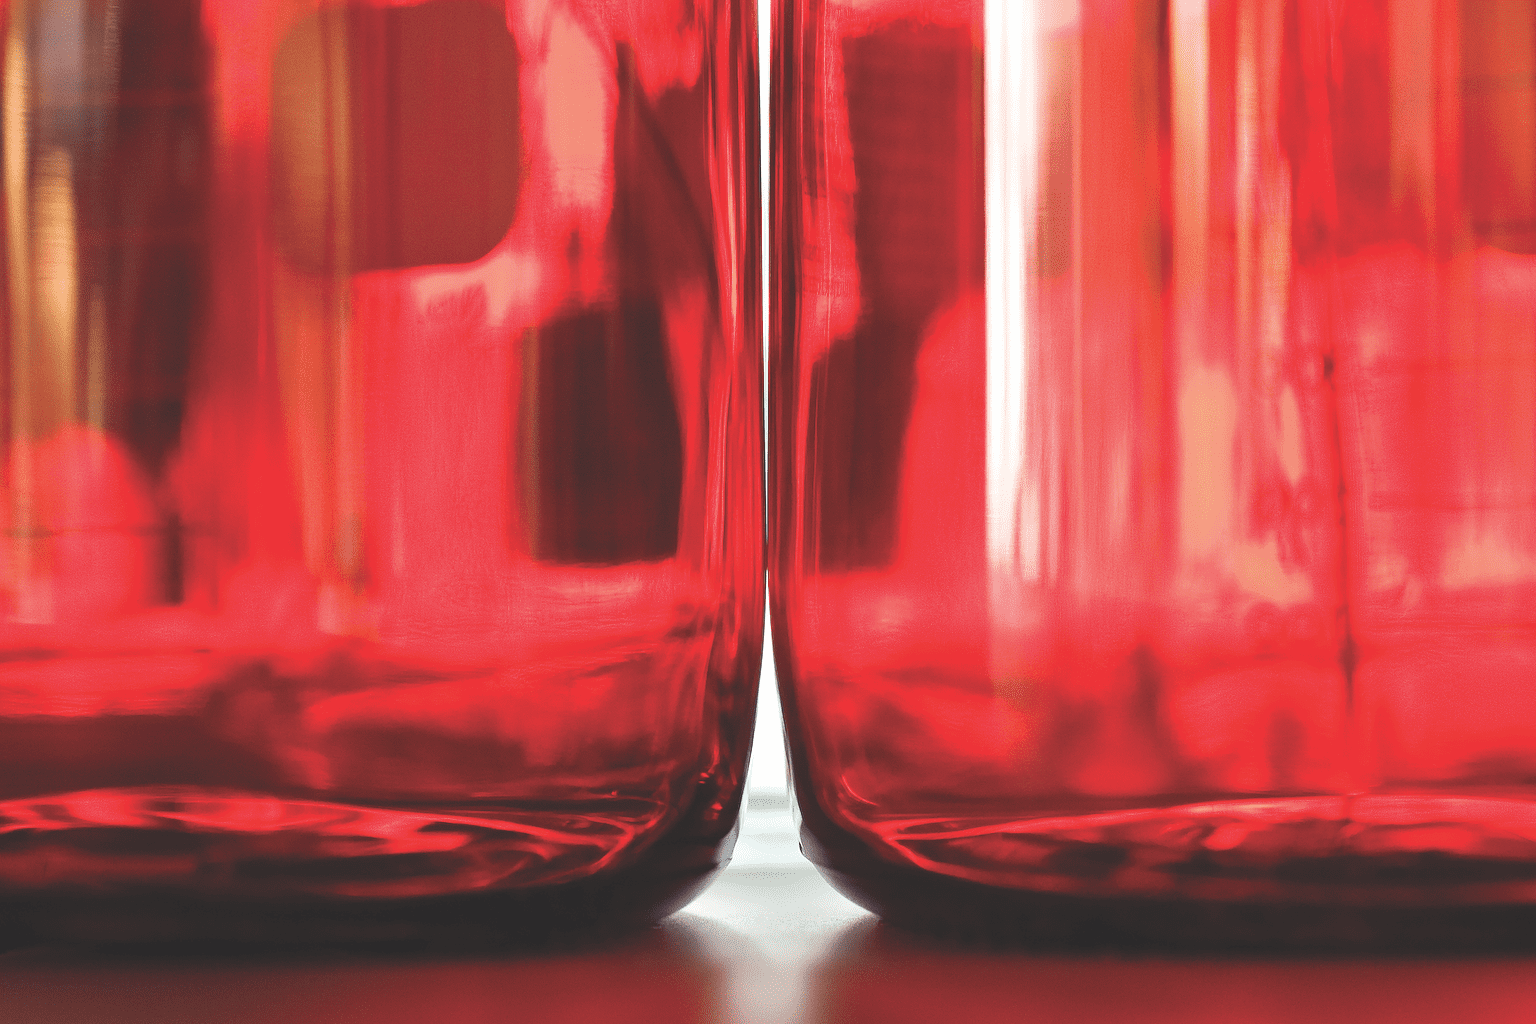 Two containers of red liquid